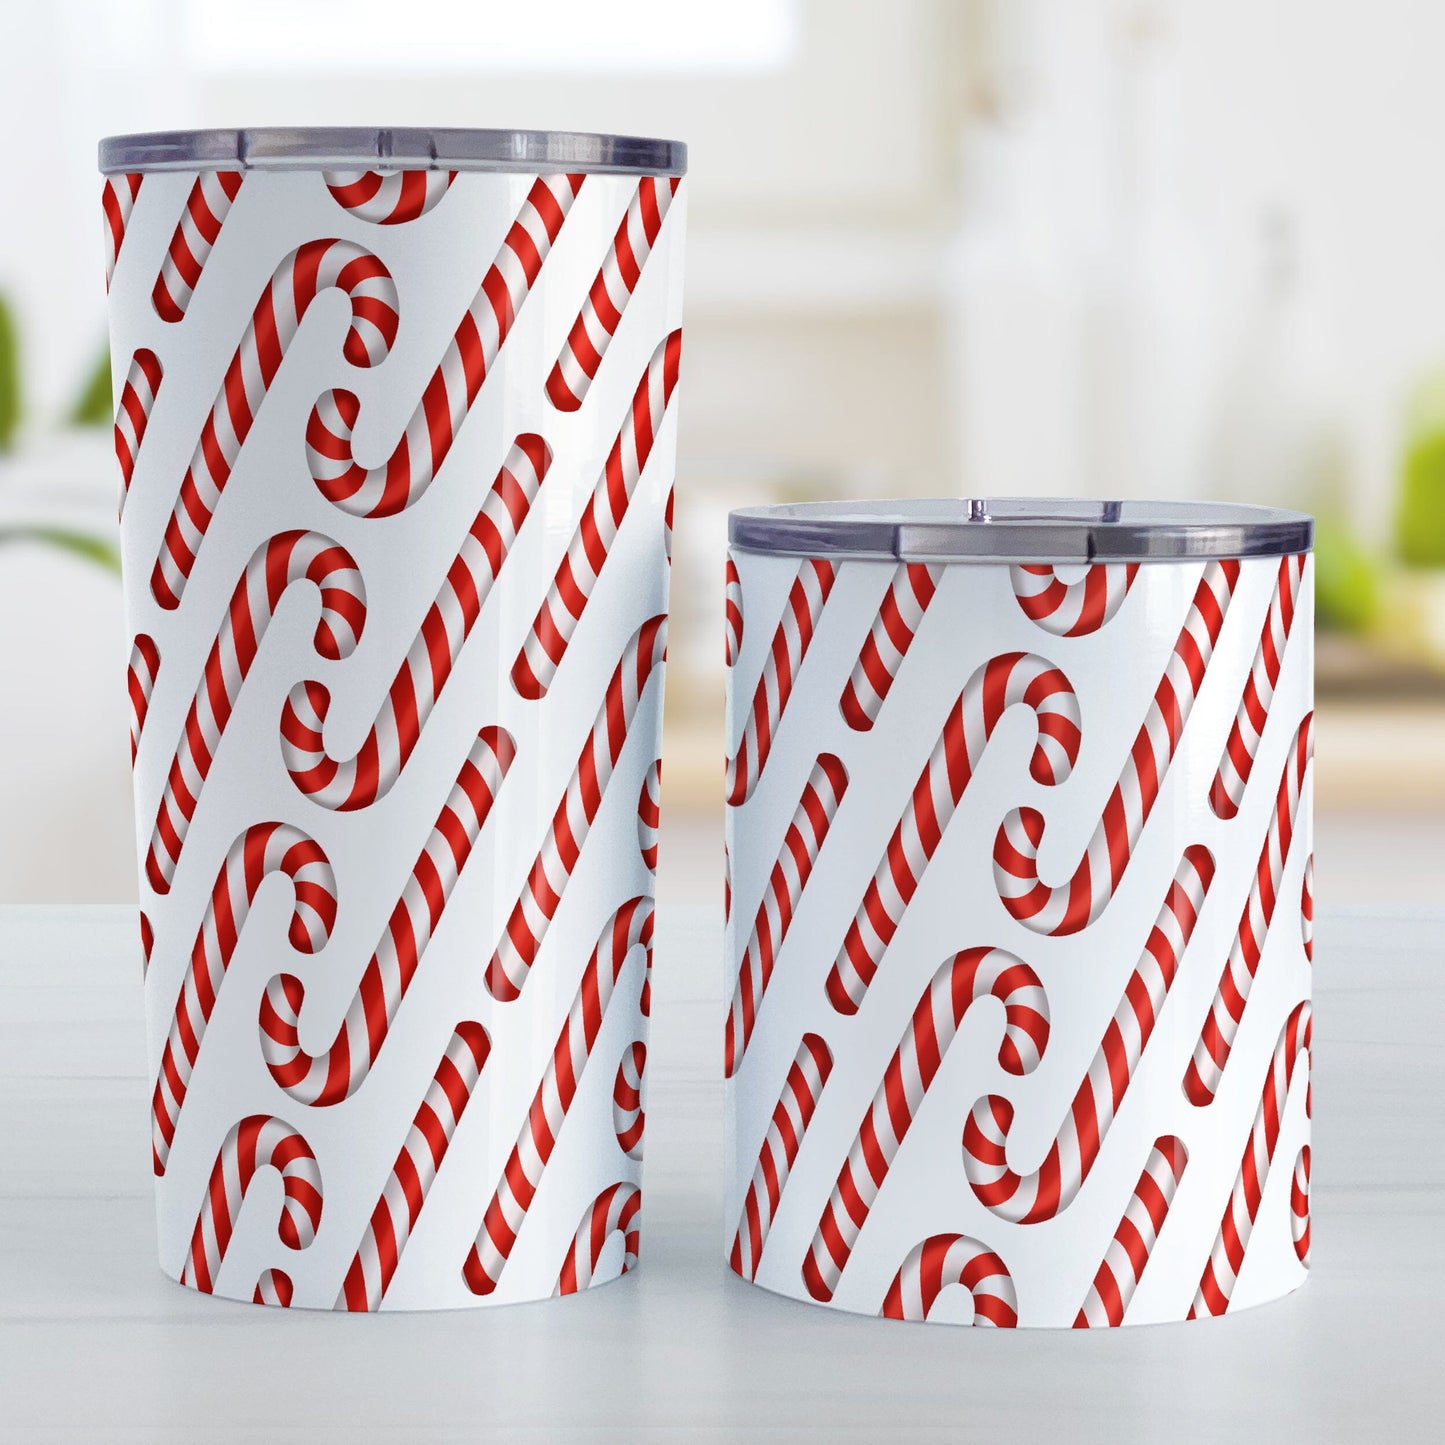 Candy Cane Pattern Tumbler Cup (20oz or 10oz) at Amy's Coffee Mugs. Stainless steel tumbler cups designed with a diagonal pattern of red and white striped candy canes that wraps around the cups. Photo shows both sized cups on a table next to each other.